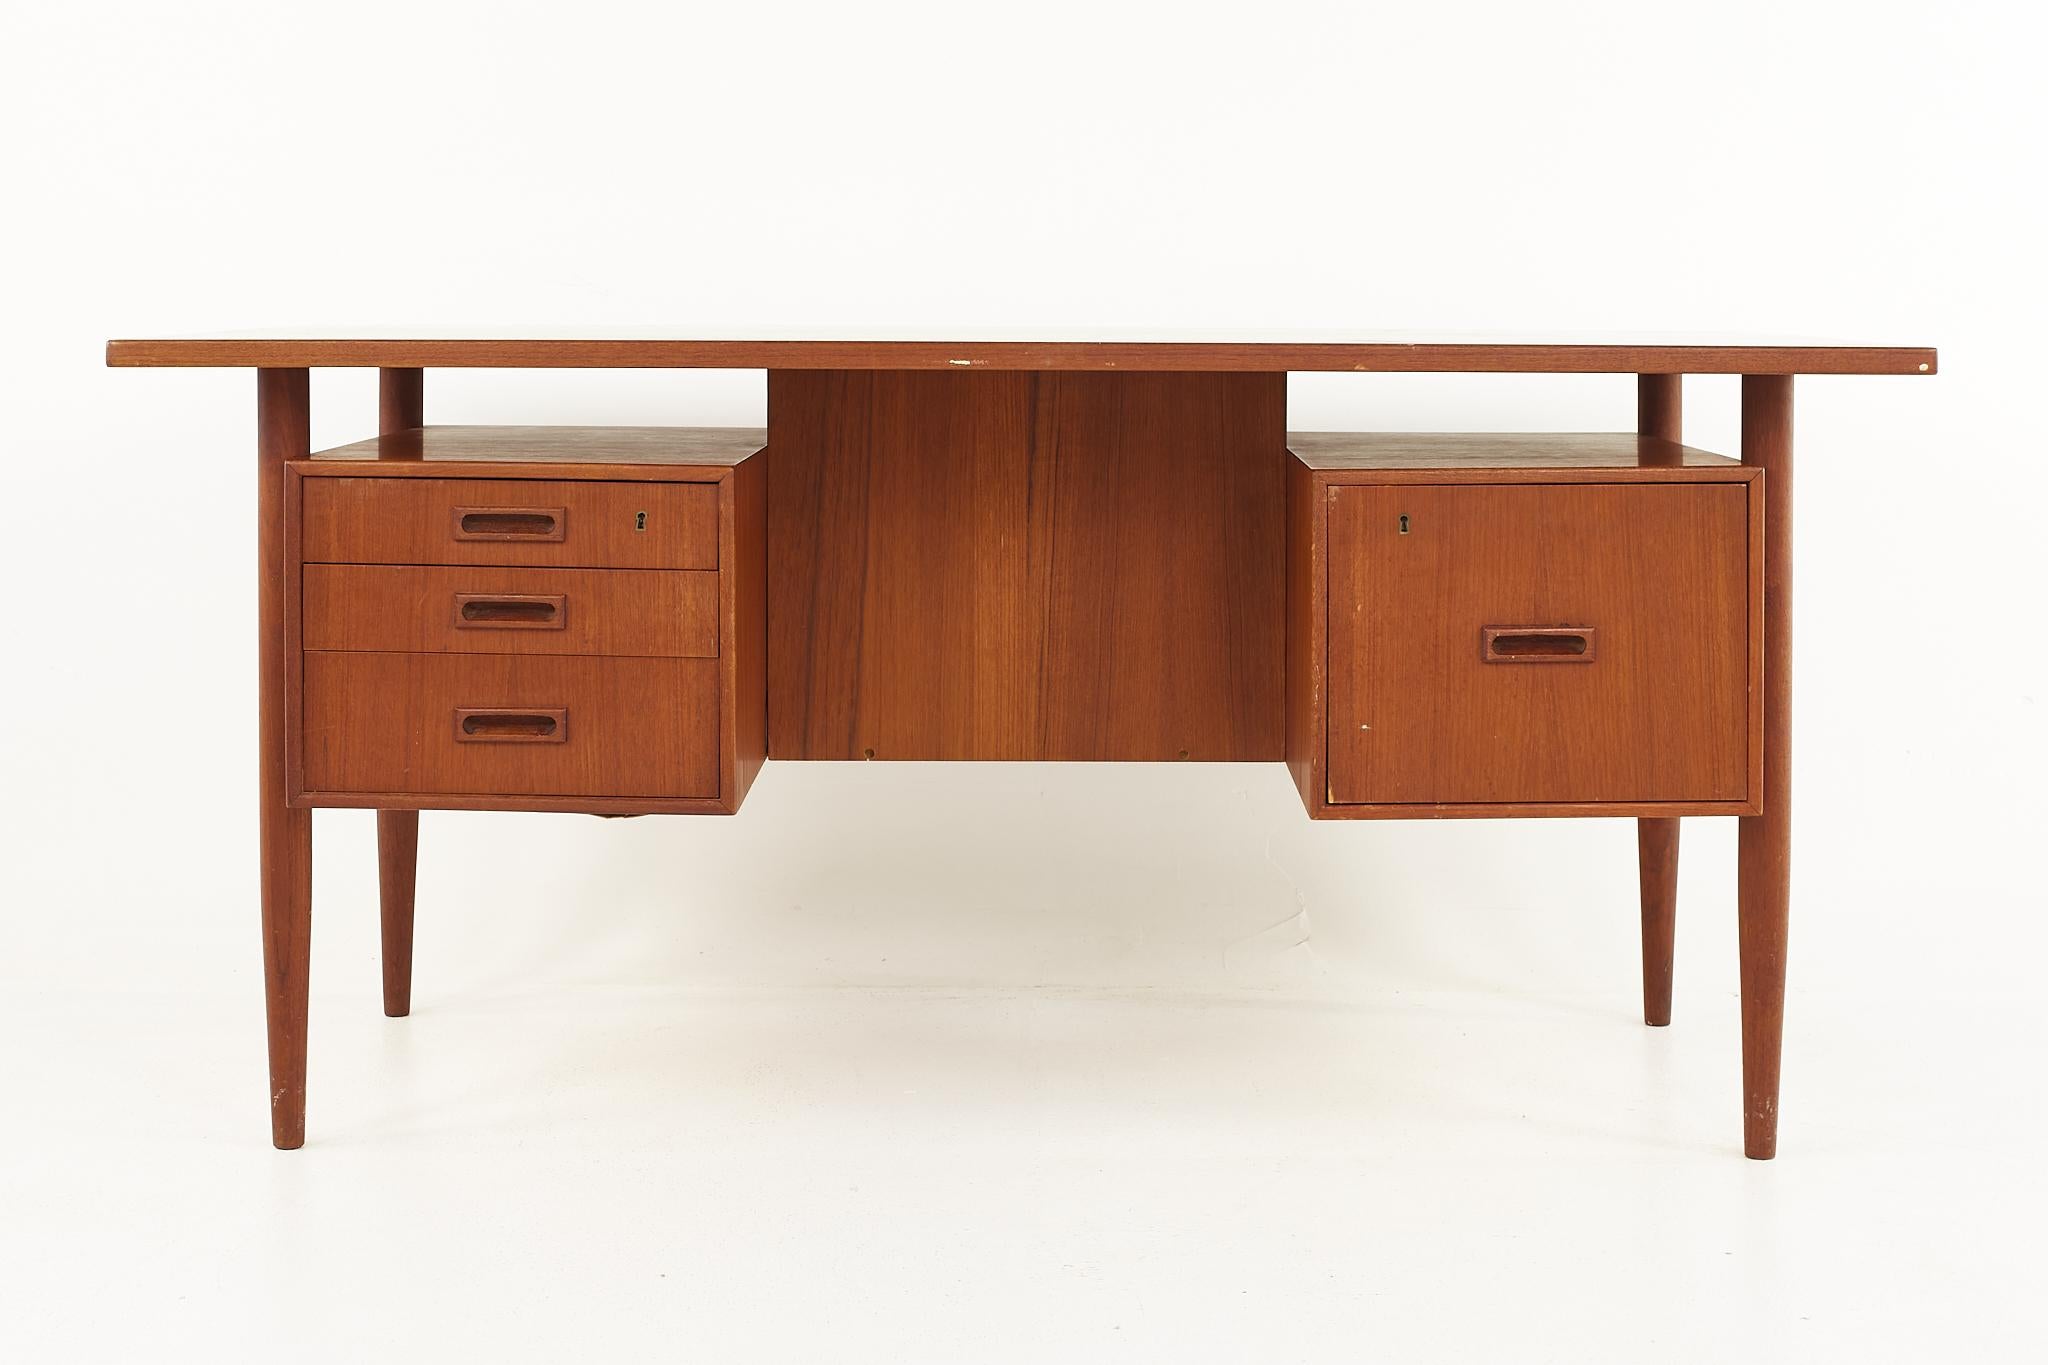 HP Hansen mid-century Danish teak desk

The desk measures: 62.5 wide x 31.5 deep x 29.5 inches high

All pieces of furniture can be had in what we call restored vintage condition. That means the piece is restored upon purchase so it’s free of